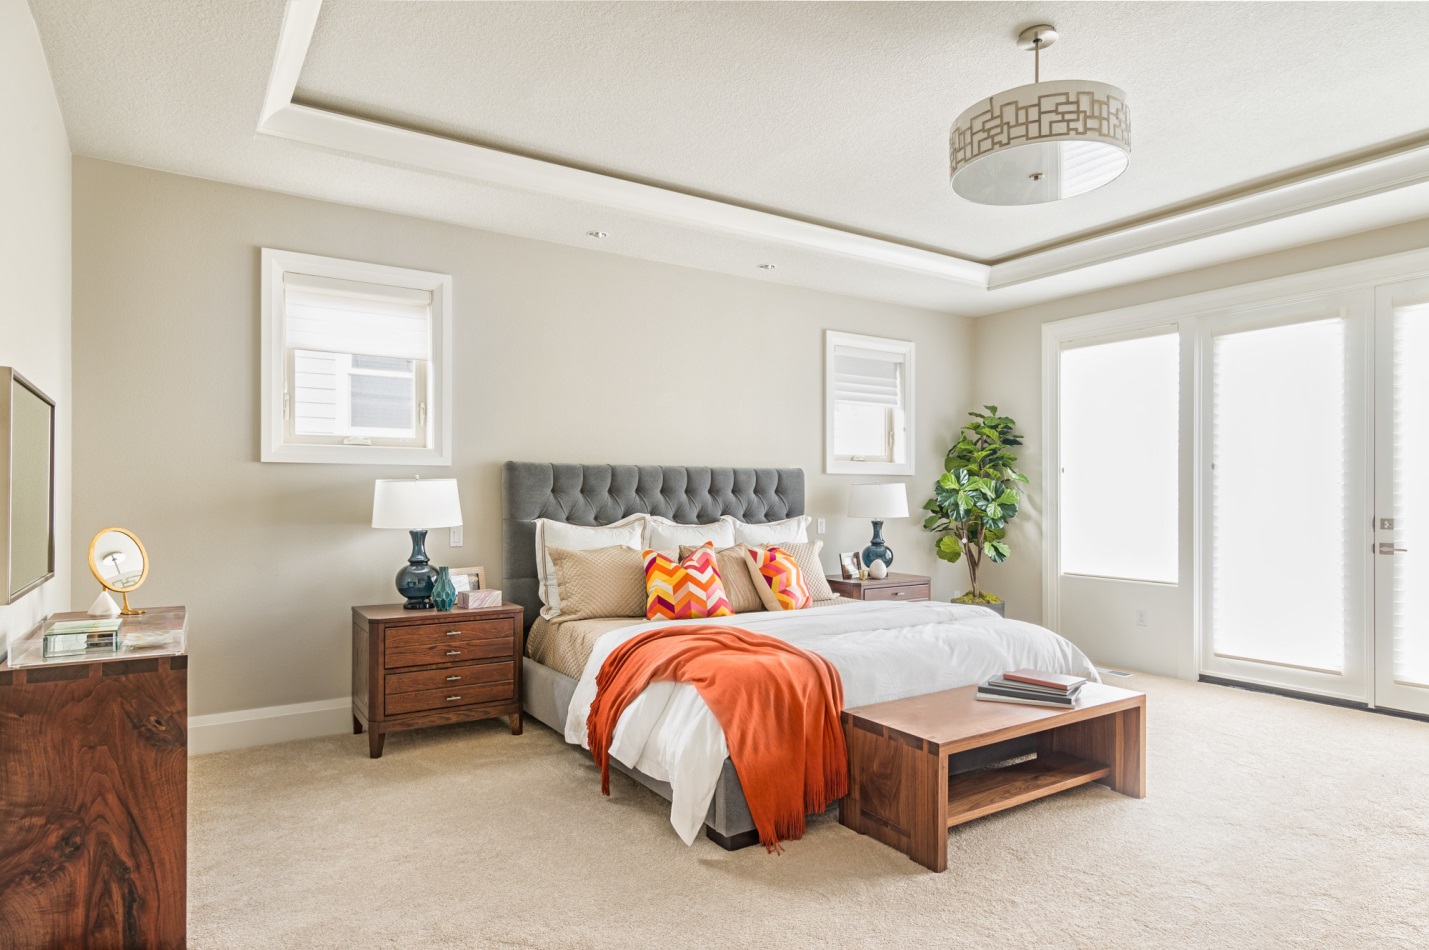 Home Haven How to Choose the Best Master Bedroom Paint Colors